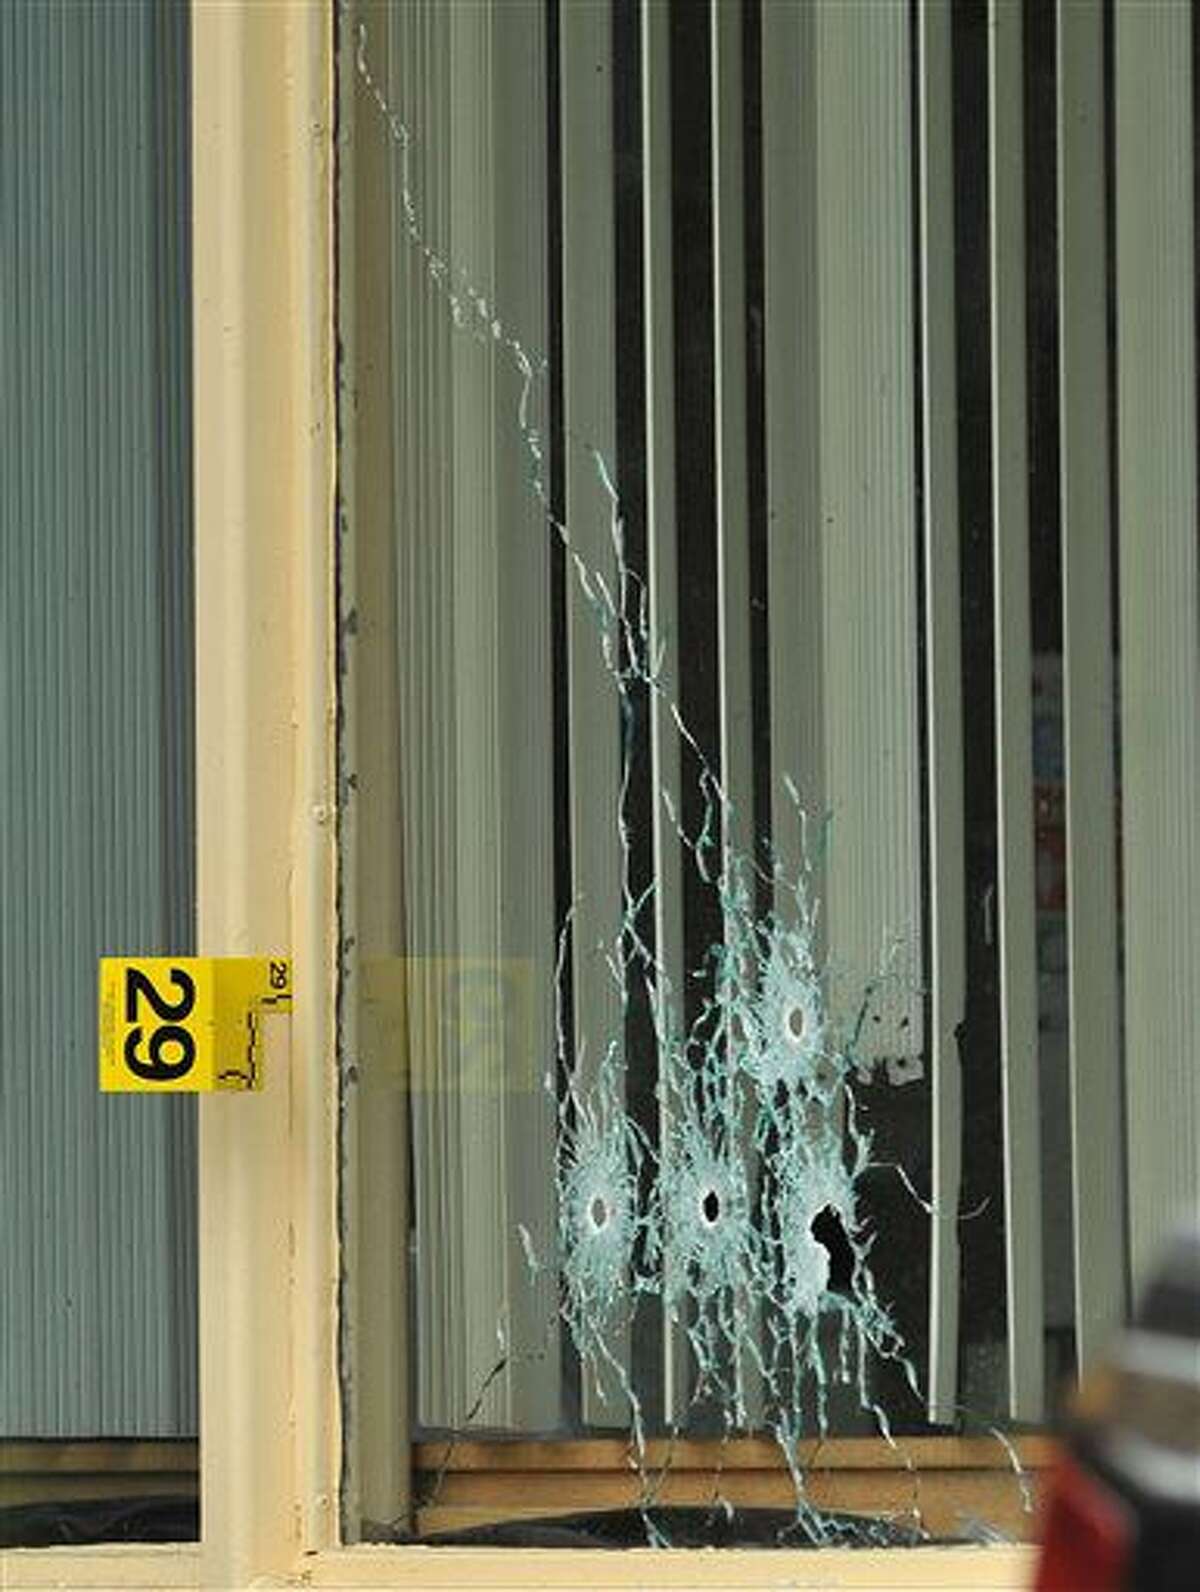 Bullet holes show in a window of a Days Inn Hotel office from a shooting early Thursday morning, July 7, 2016. A newspaper carrier was killed and four other people were wounded when a man opened fire, first at the Days Inn and then on cars traveling along a parkway in East Tennessee early Thursday morning. (Andre Teague/Bristol Herald Courier via AP)